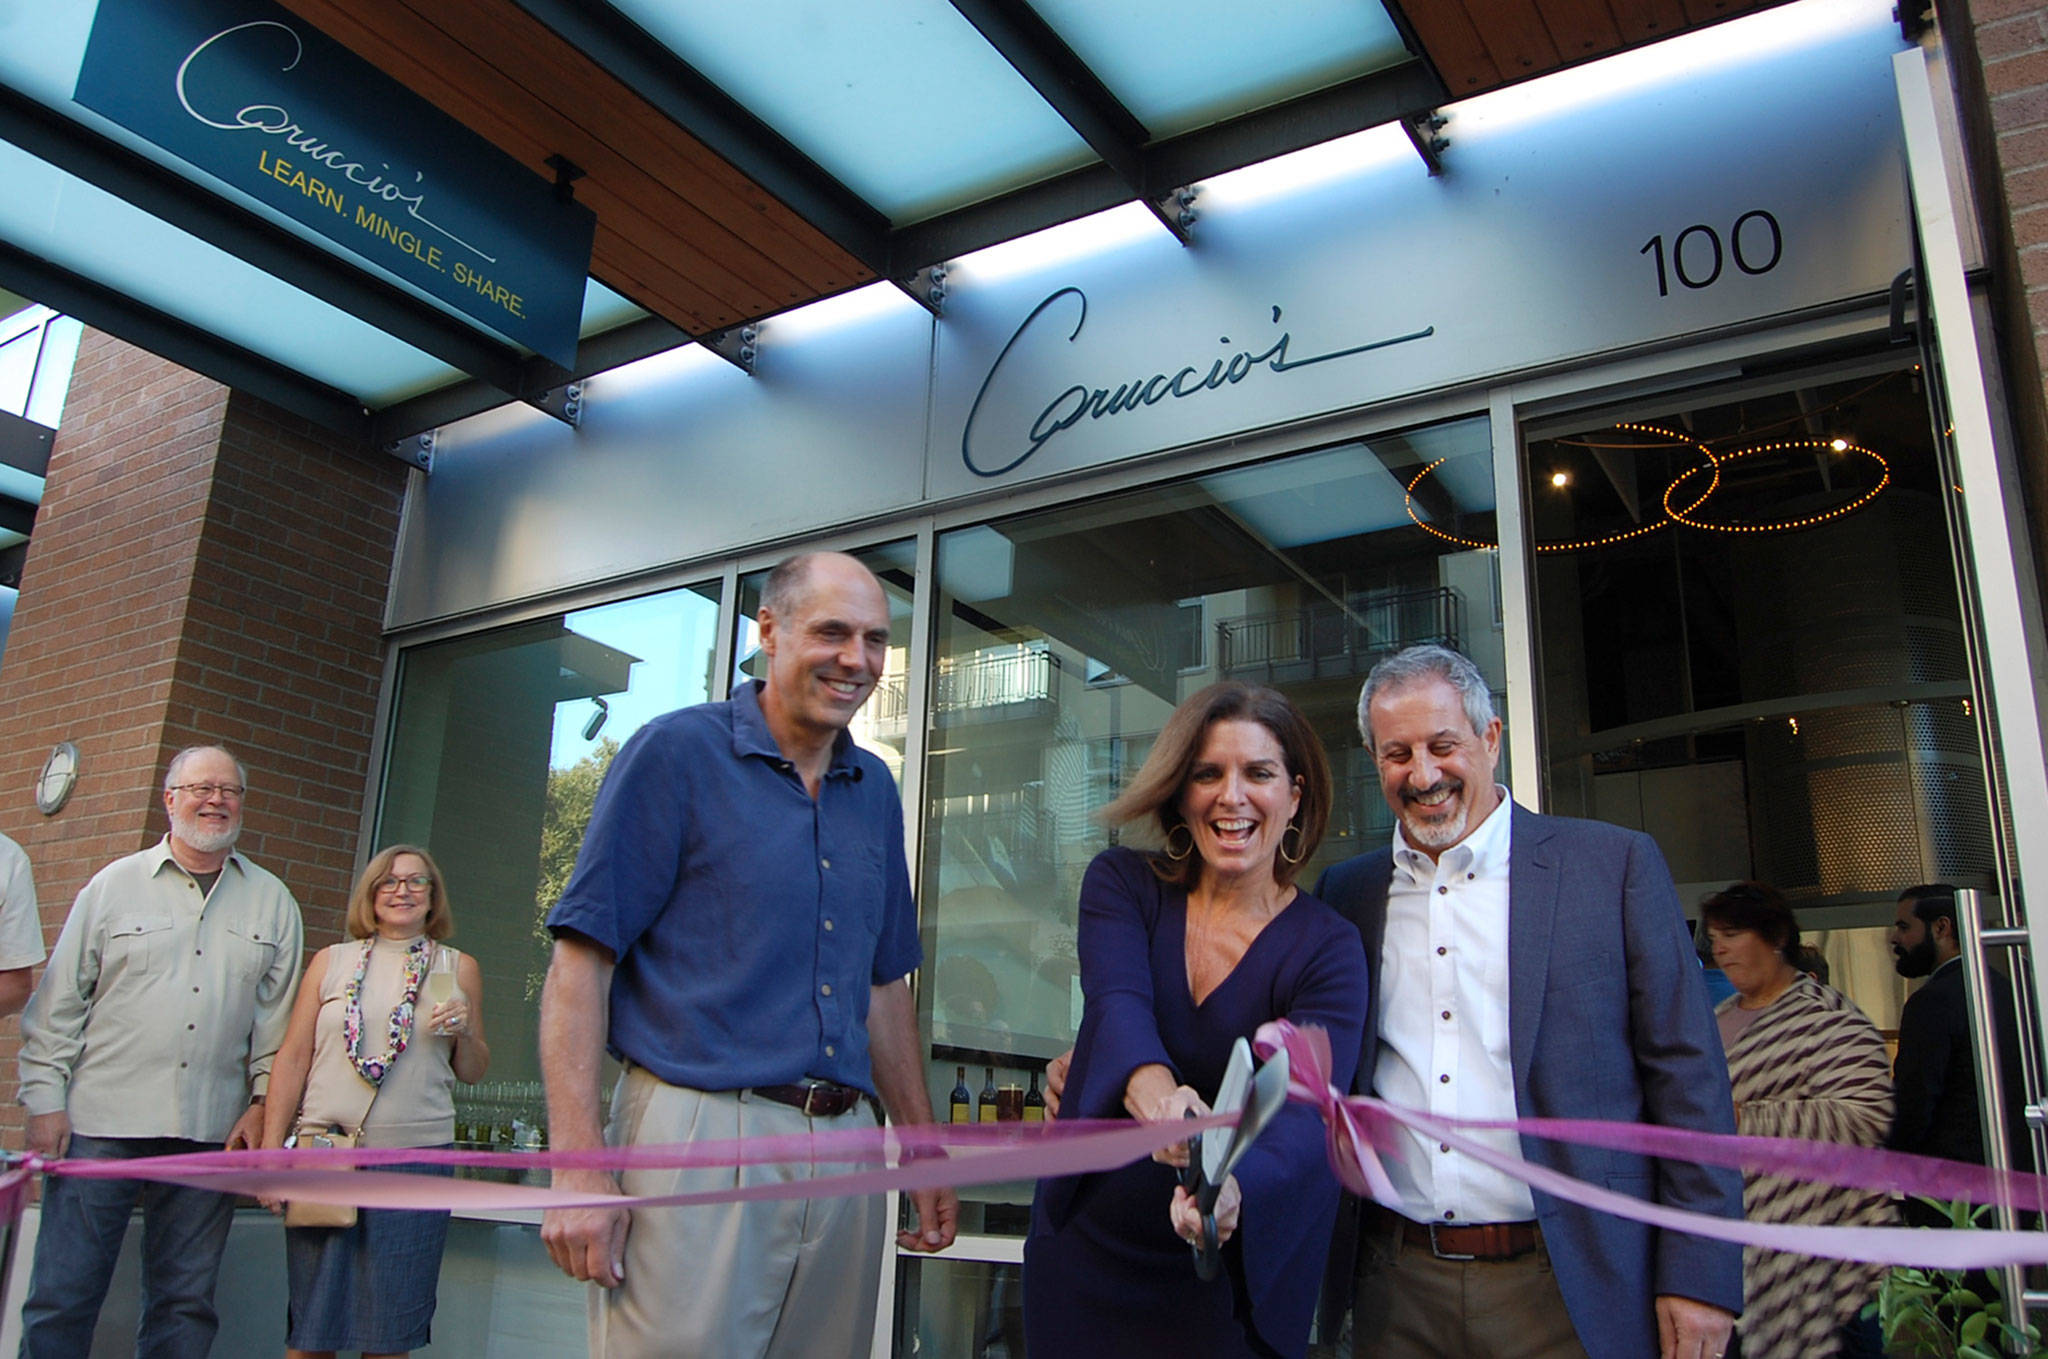 Caruccio’s celebrates its grand opening with food, fun and family. Katie Metzger/staff photo